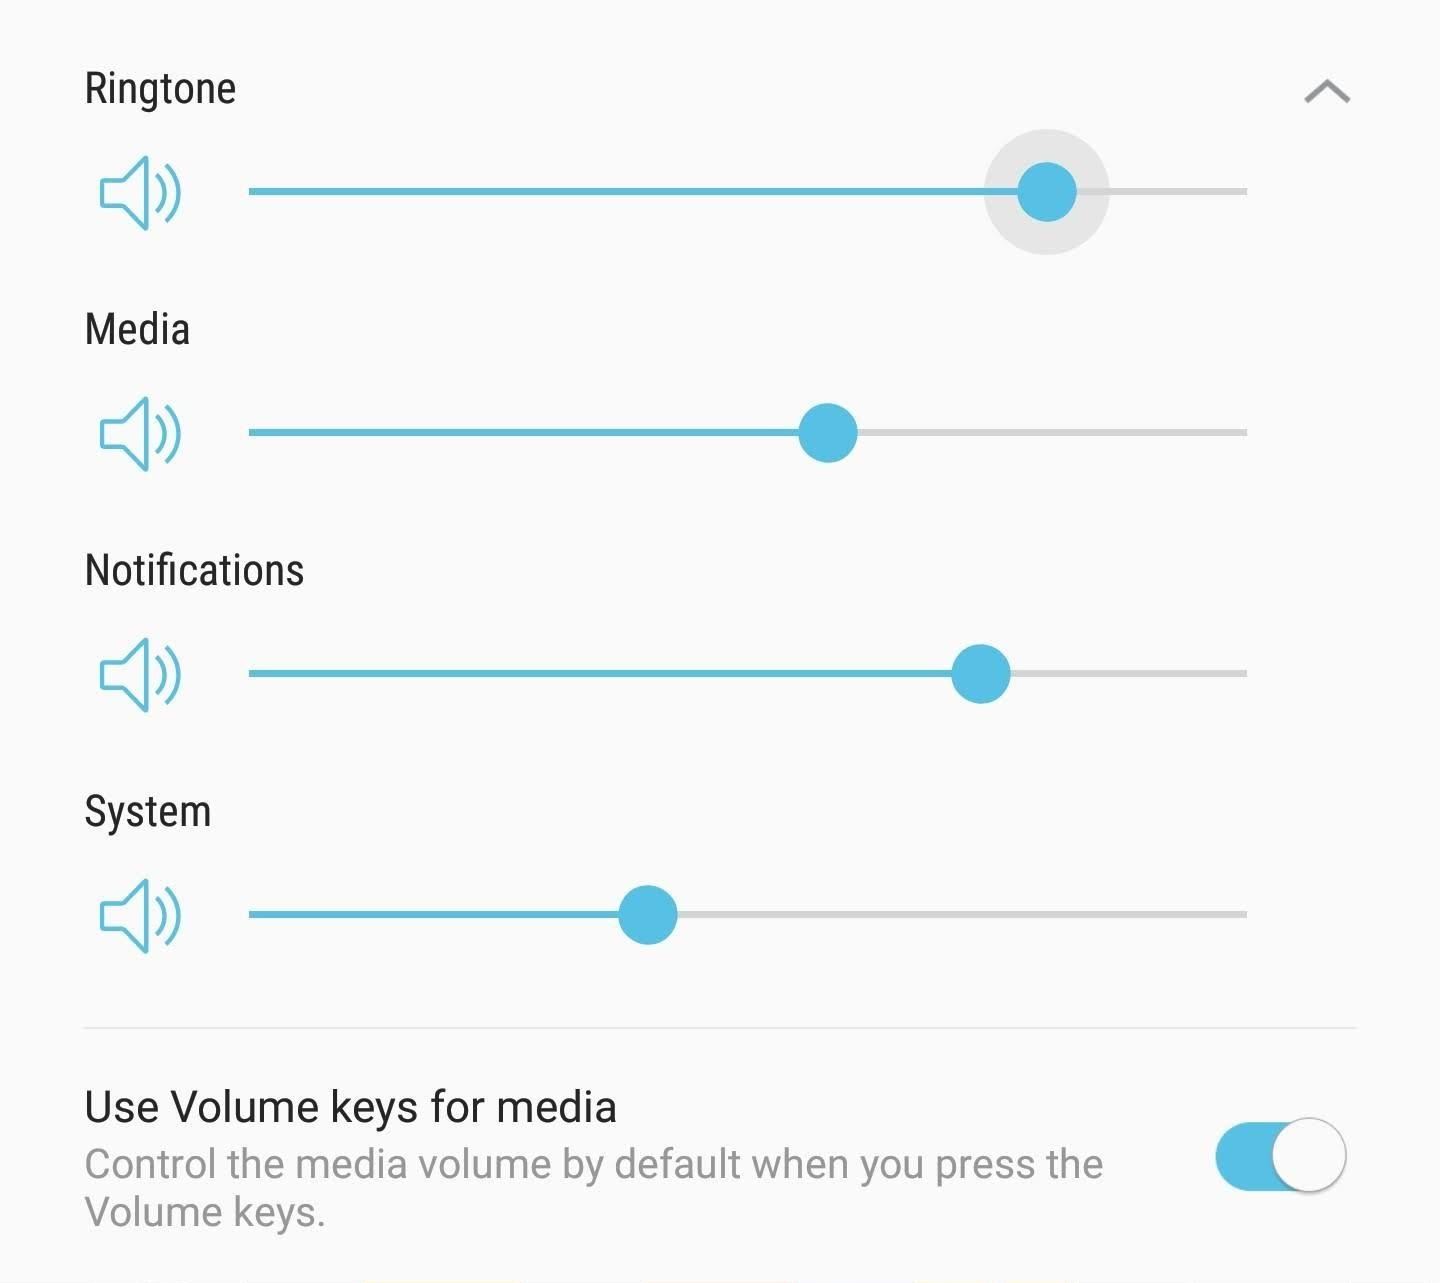 How to Make the Volume Buttons on Your Galaxy Note 9 Control Media Volume by Default